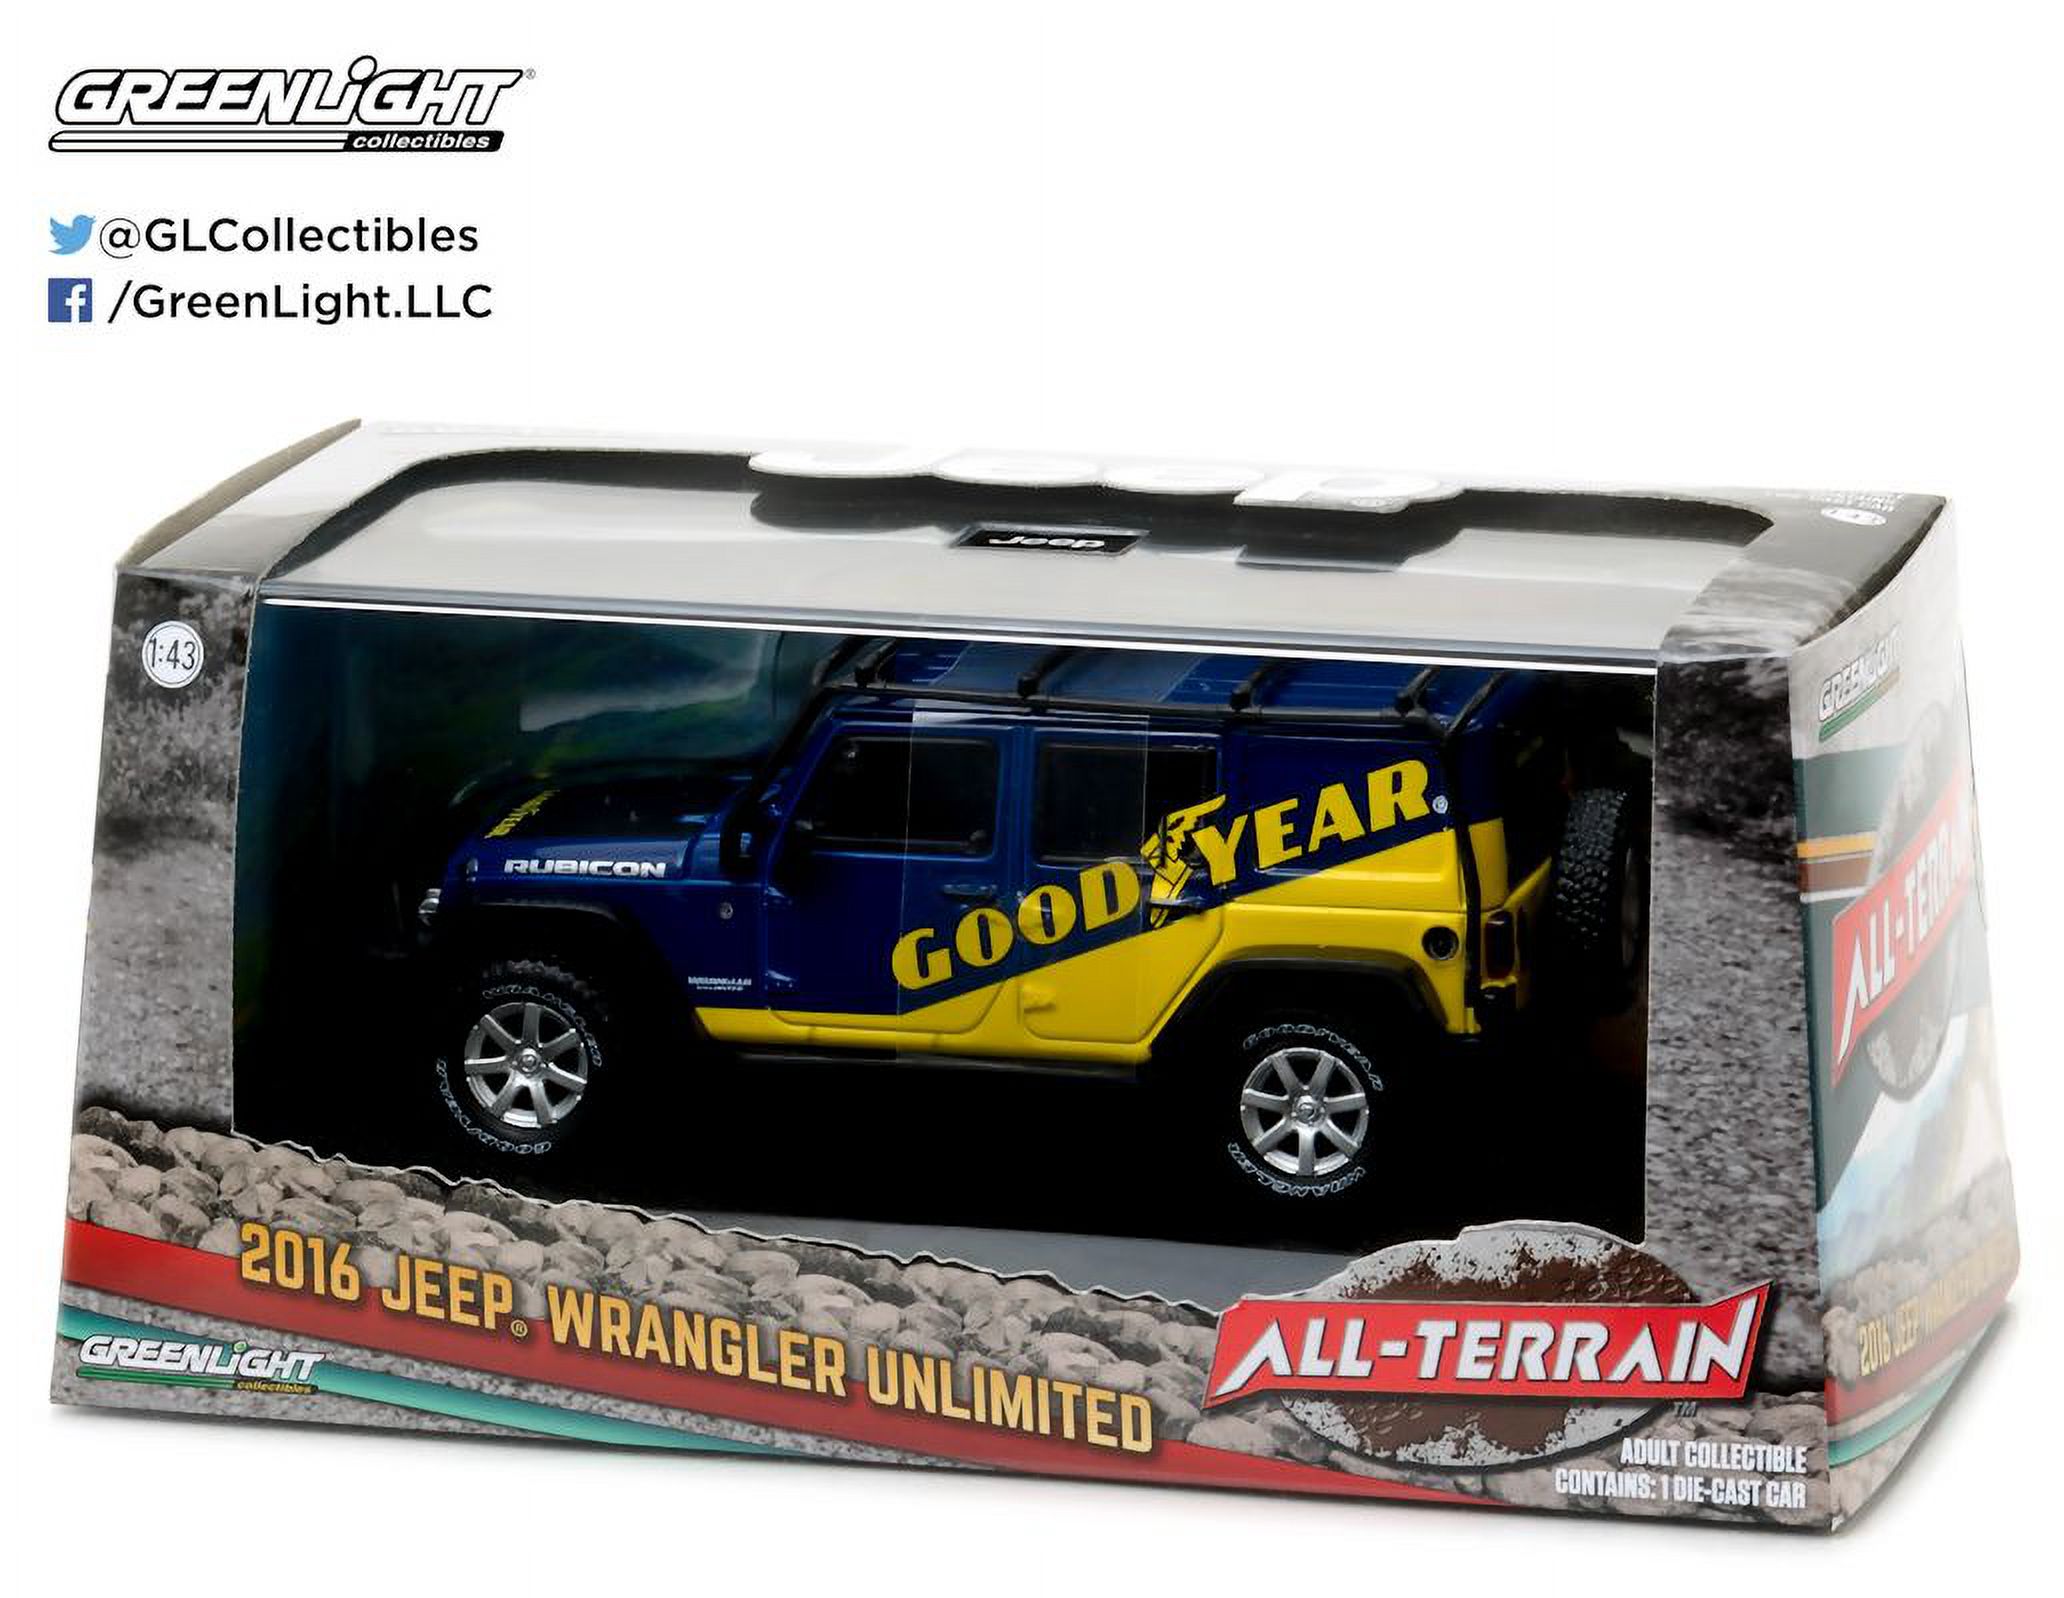 Greenlight 86080 1 isto 43 2016 Jeep Wrangler Unlimited Good Year with Roof Rack&#44; Fender Flares & Winch Diecast Model Car - image 4 of 4